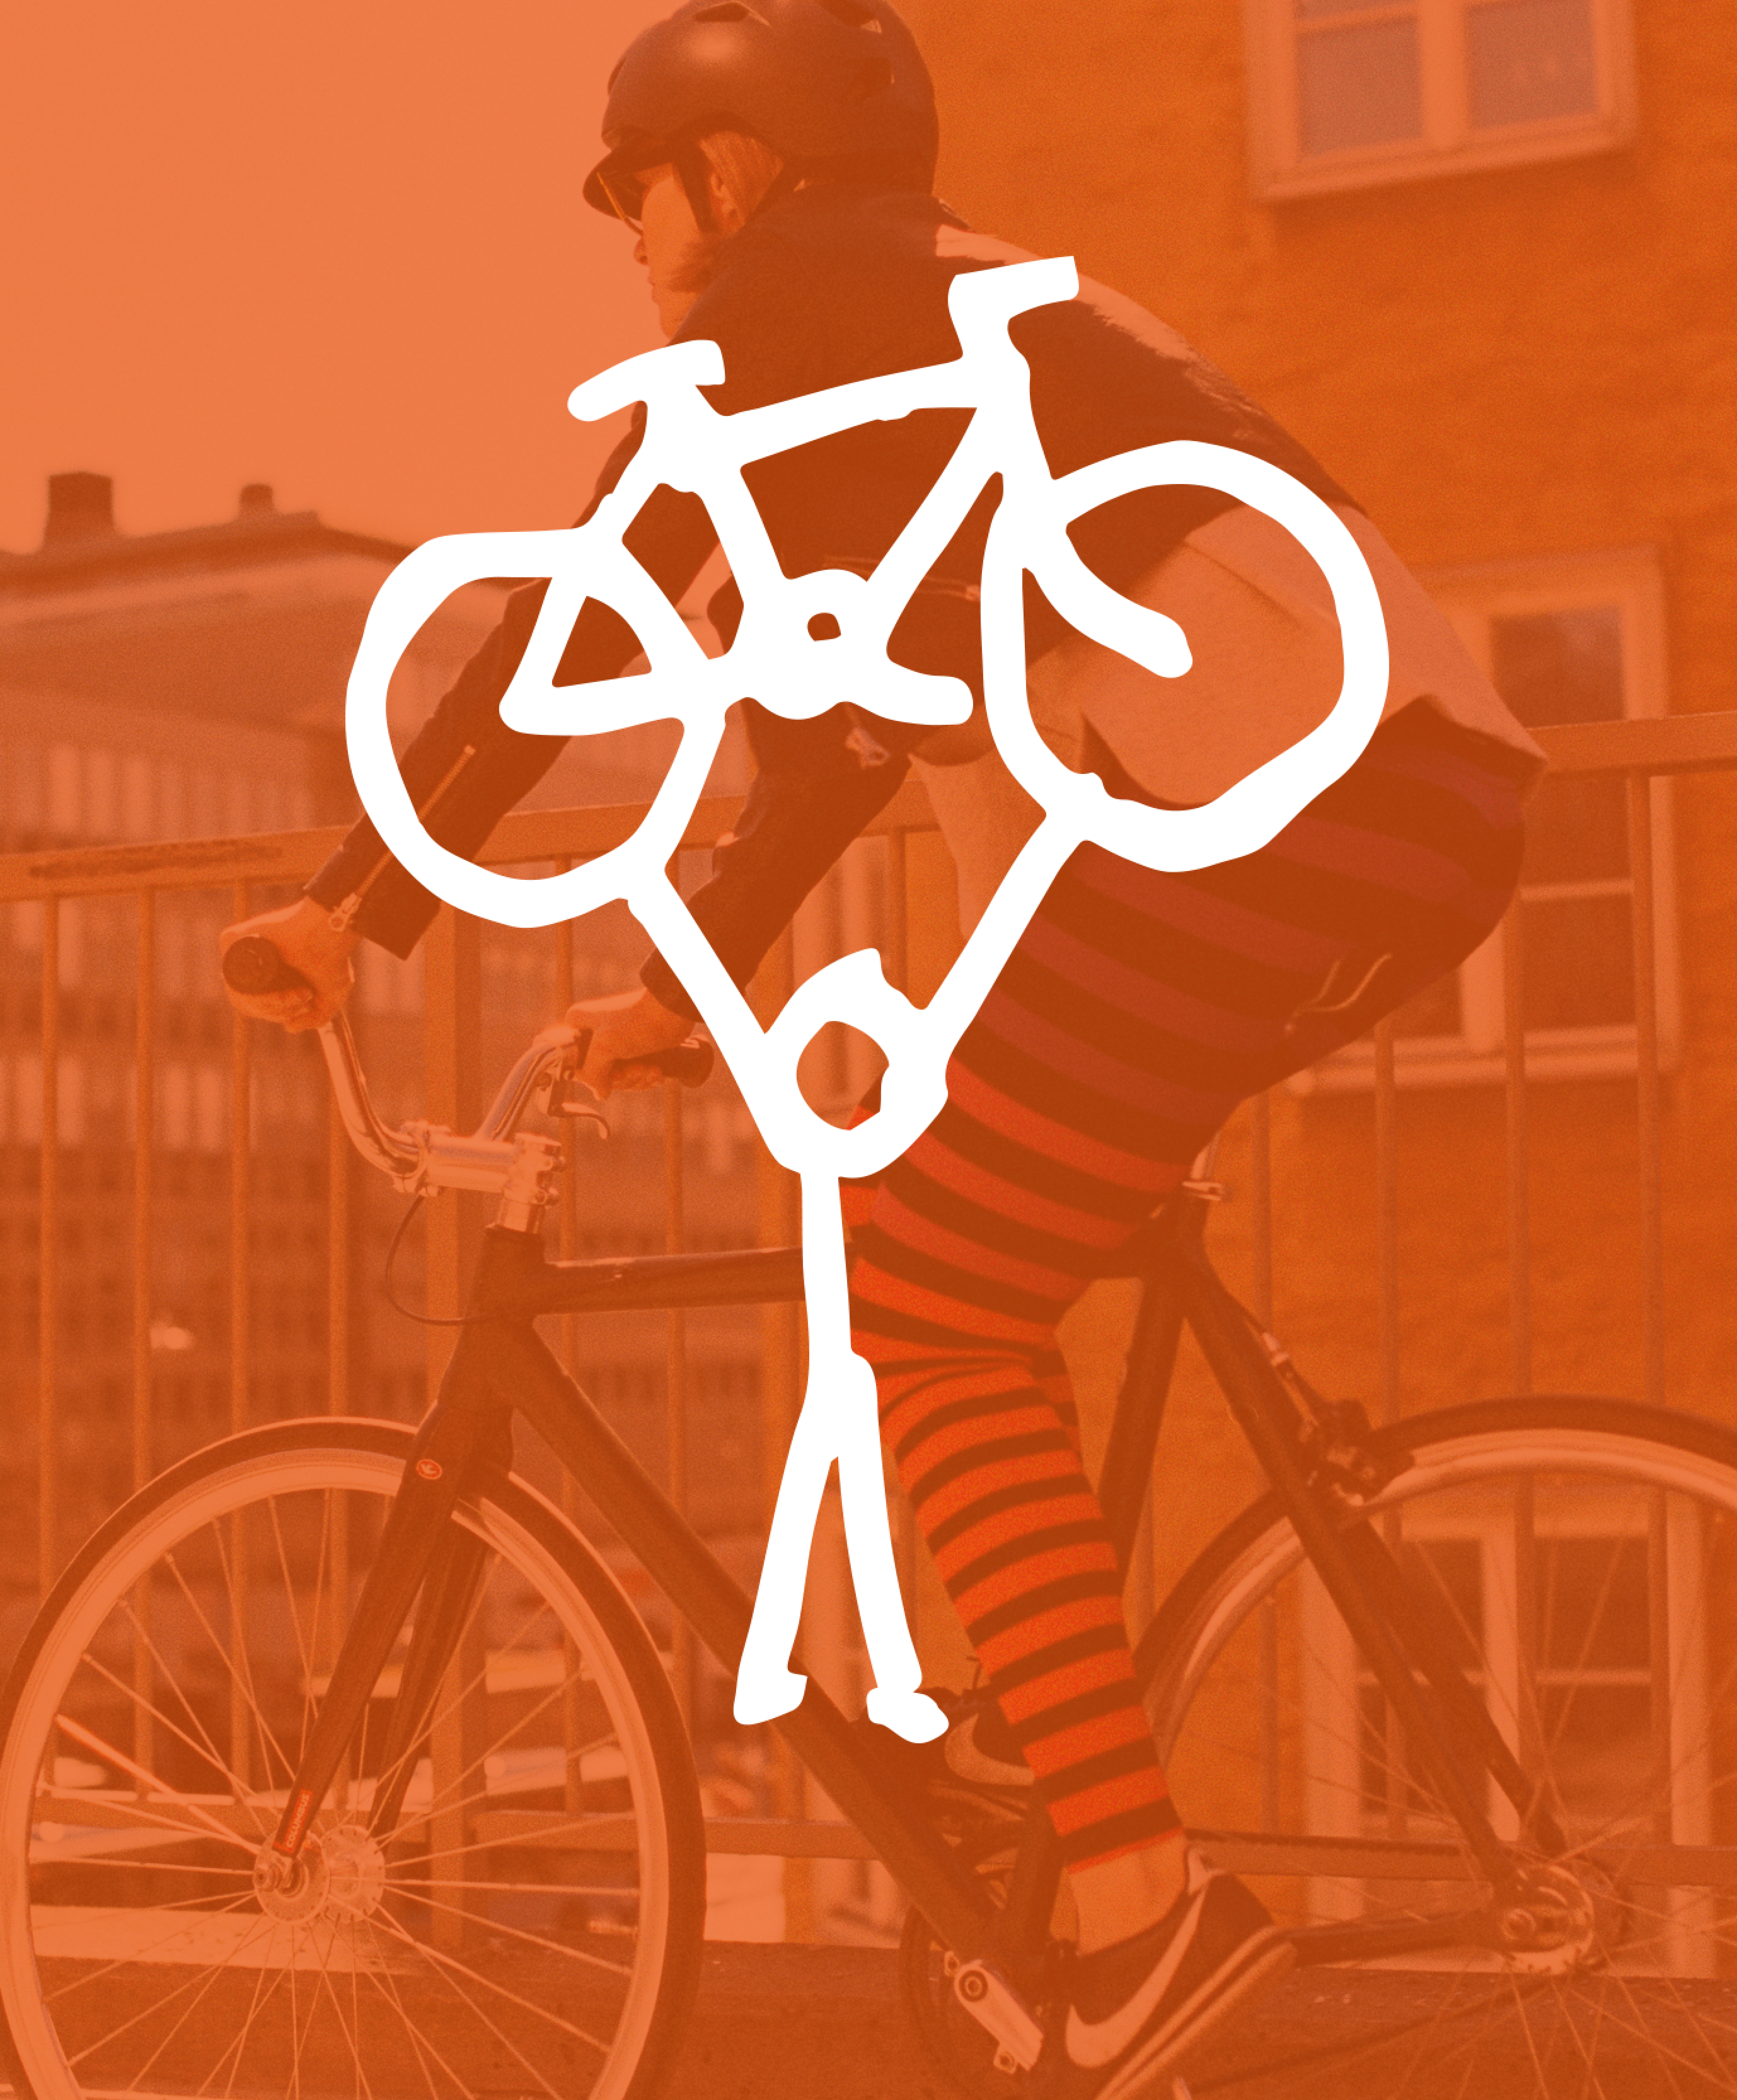 A person riding a city bike with an ATR's stick figure holding bike up logo overlayed.